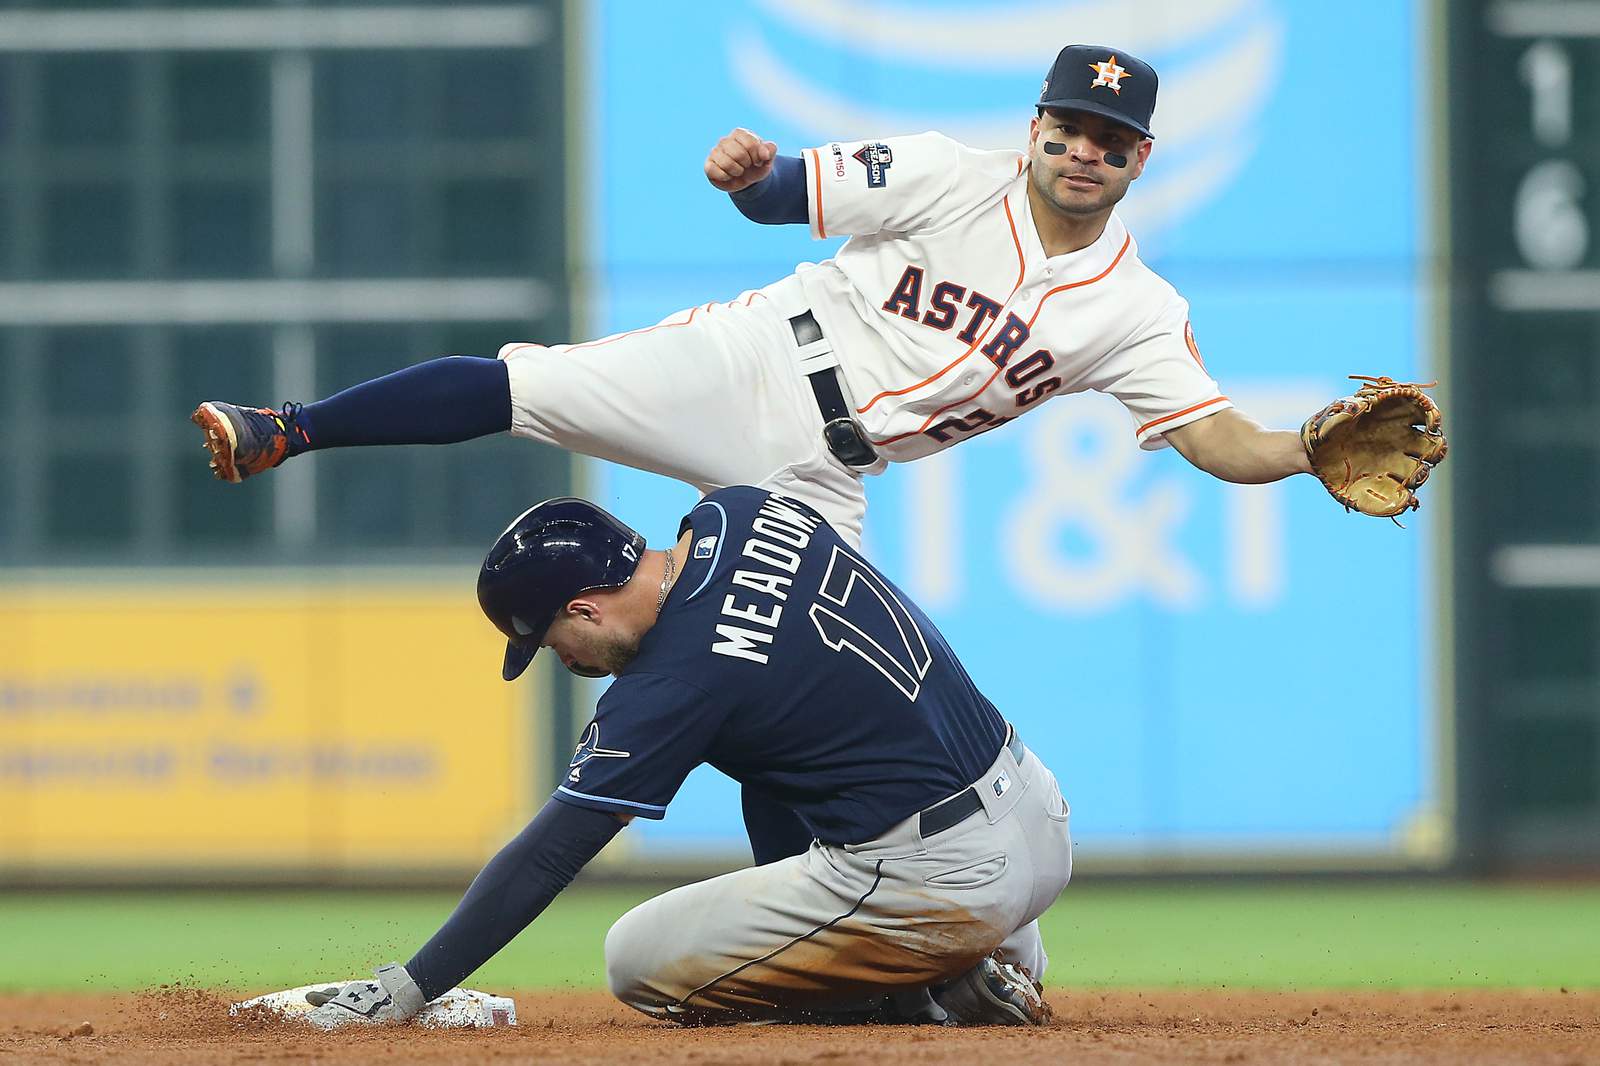 3 things to know about the Tampa Bay Rays, the Astros' ALCS opponent